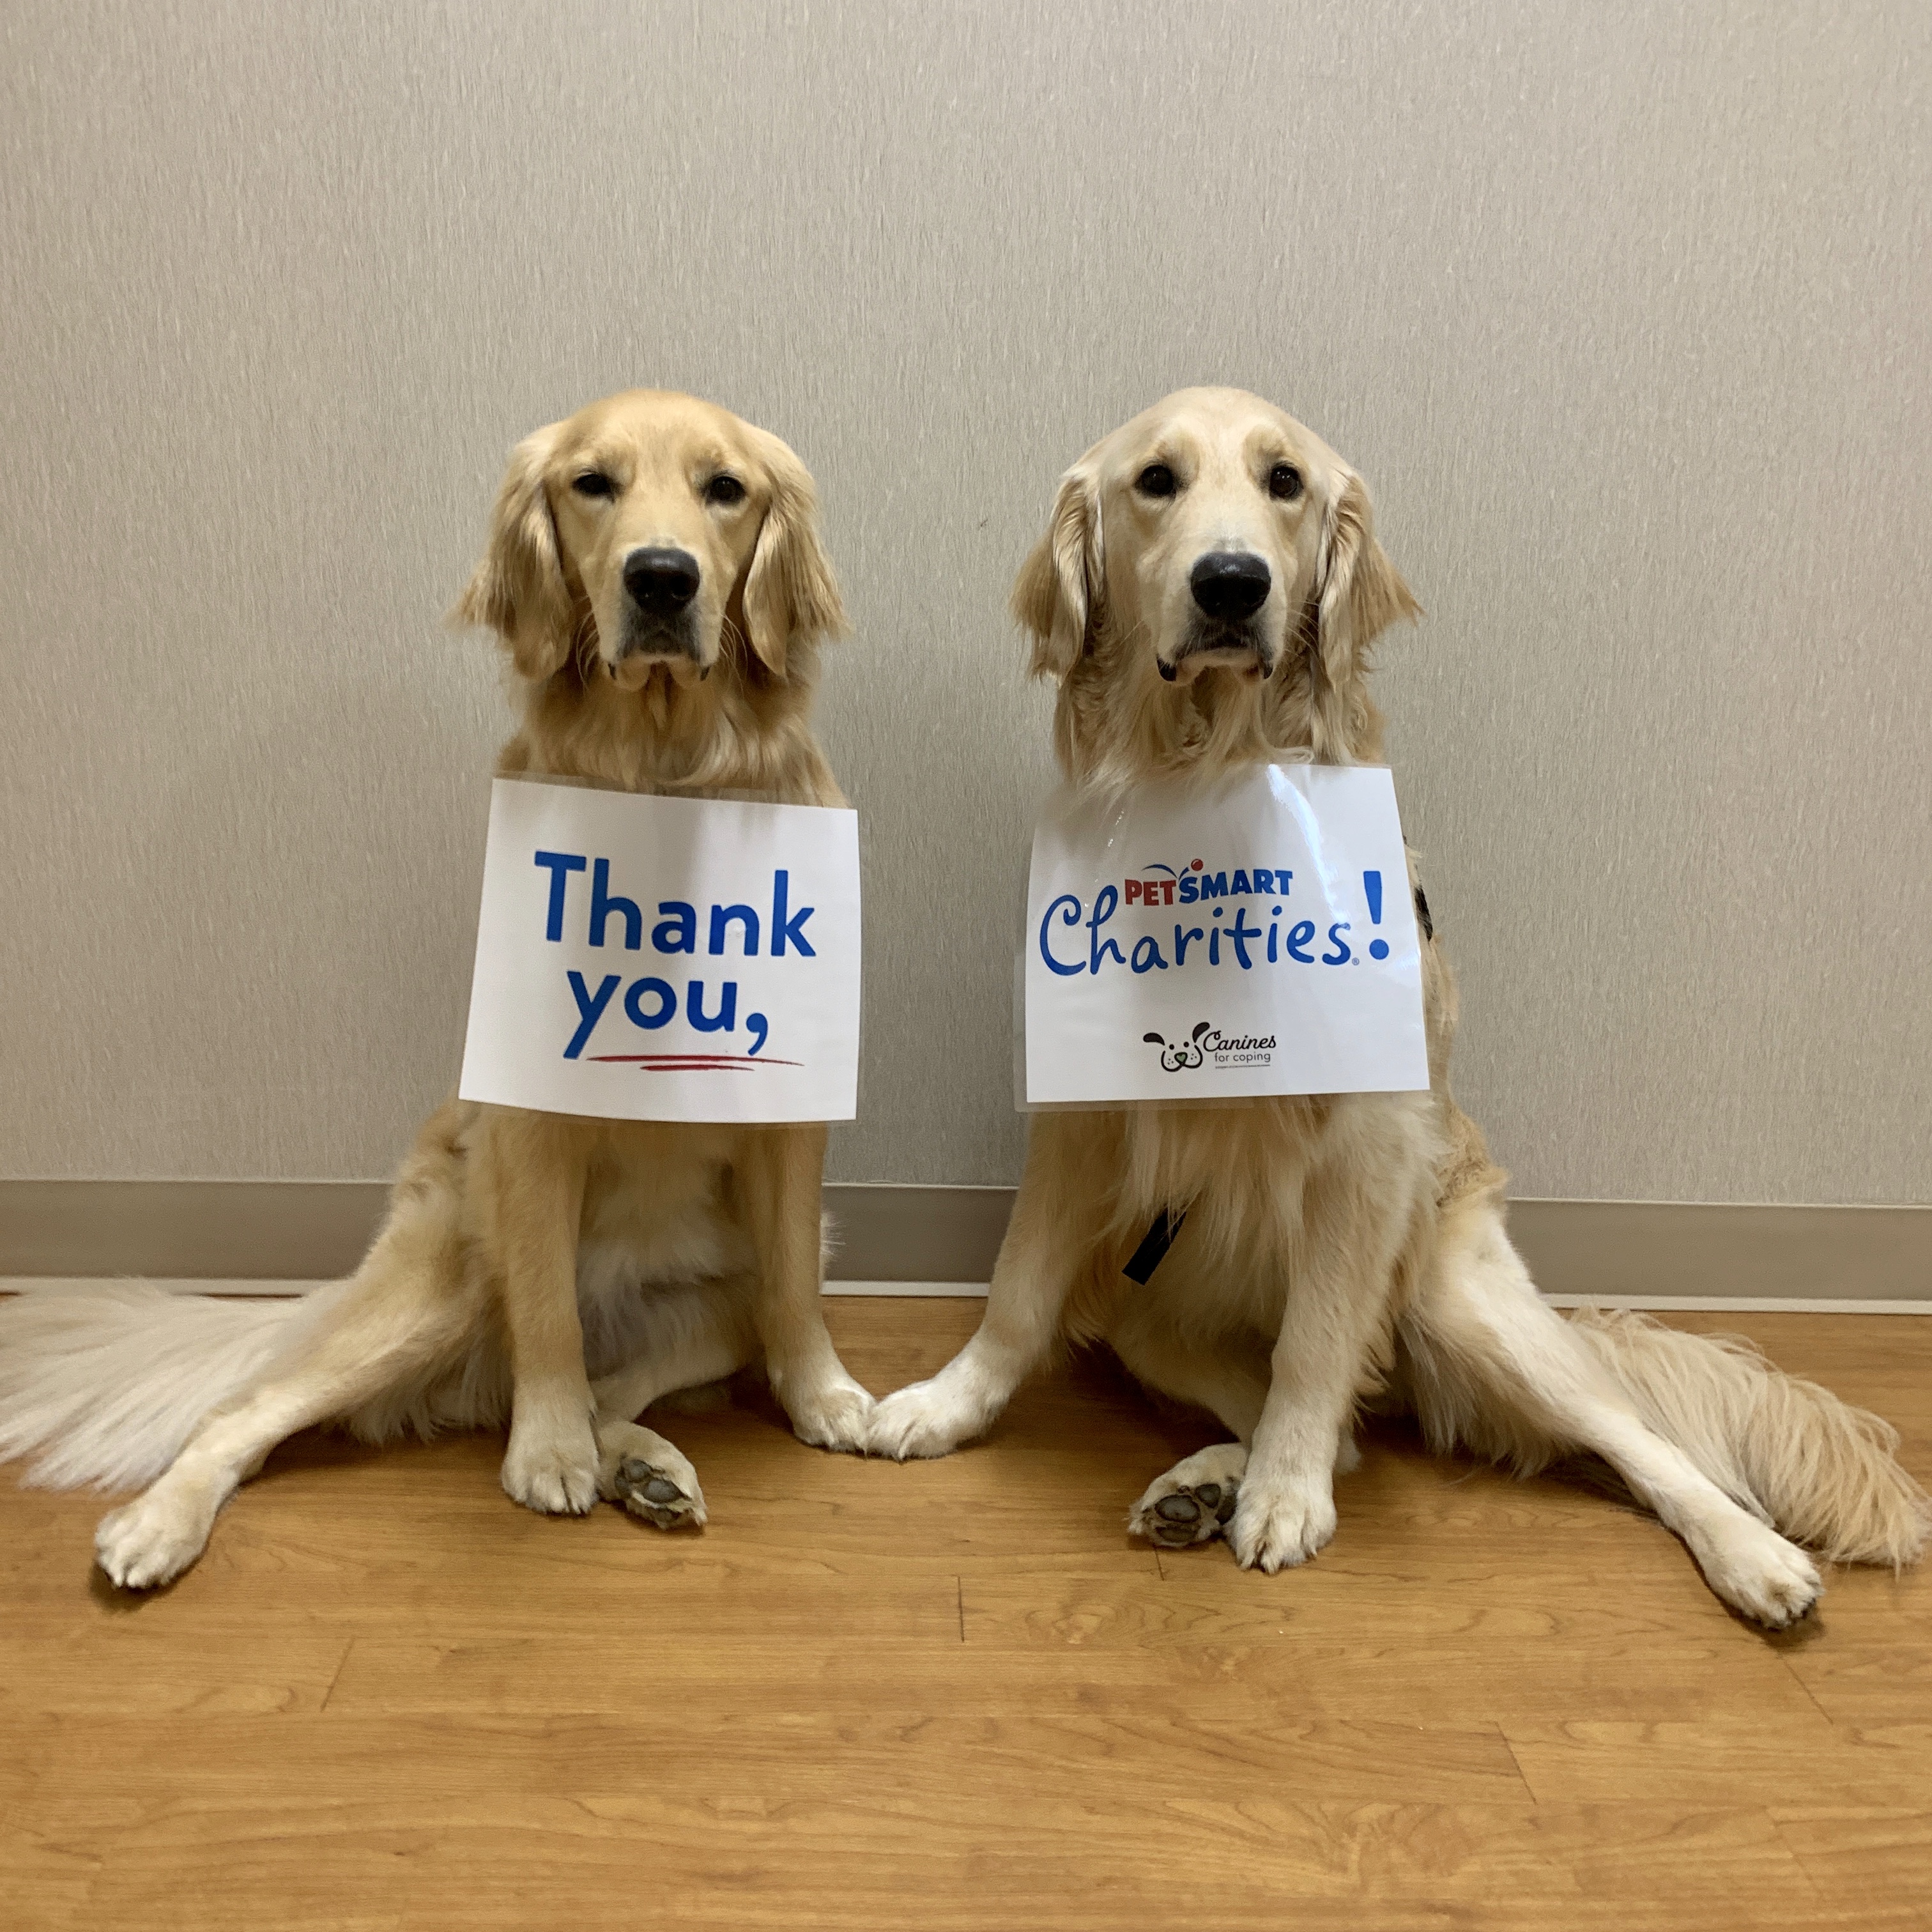 Huntsville Hospital Foundation Receives $186,000 Grant from PetSmart Charities® to Continue Facility Dog Program